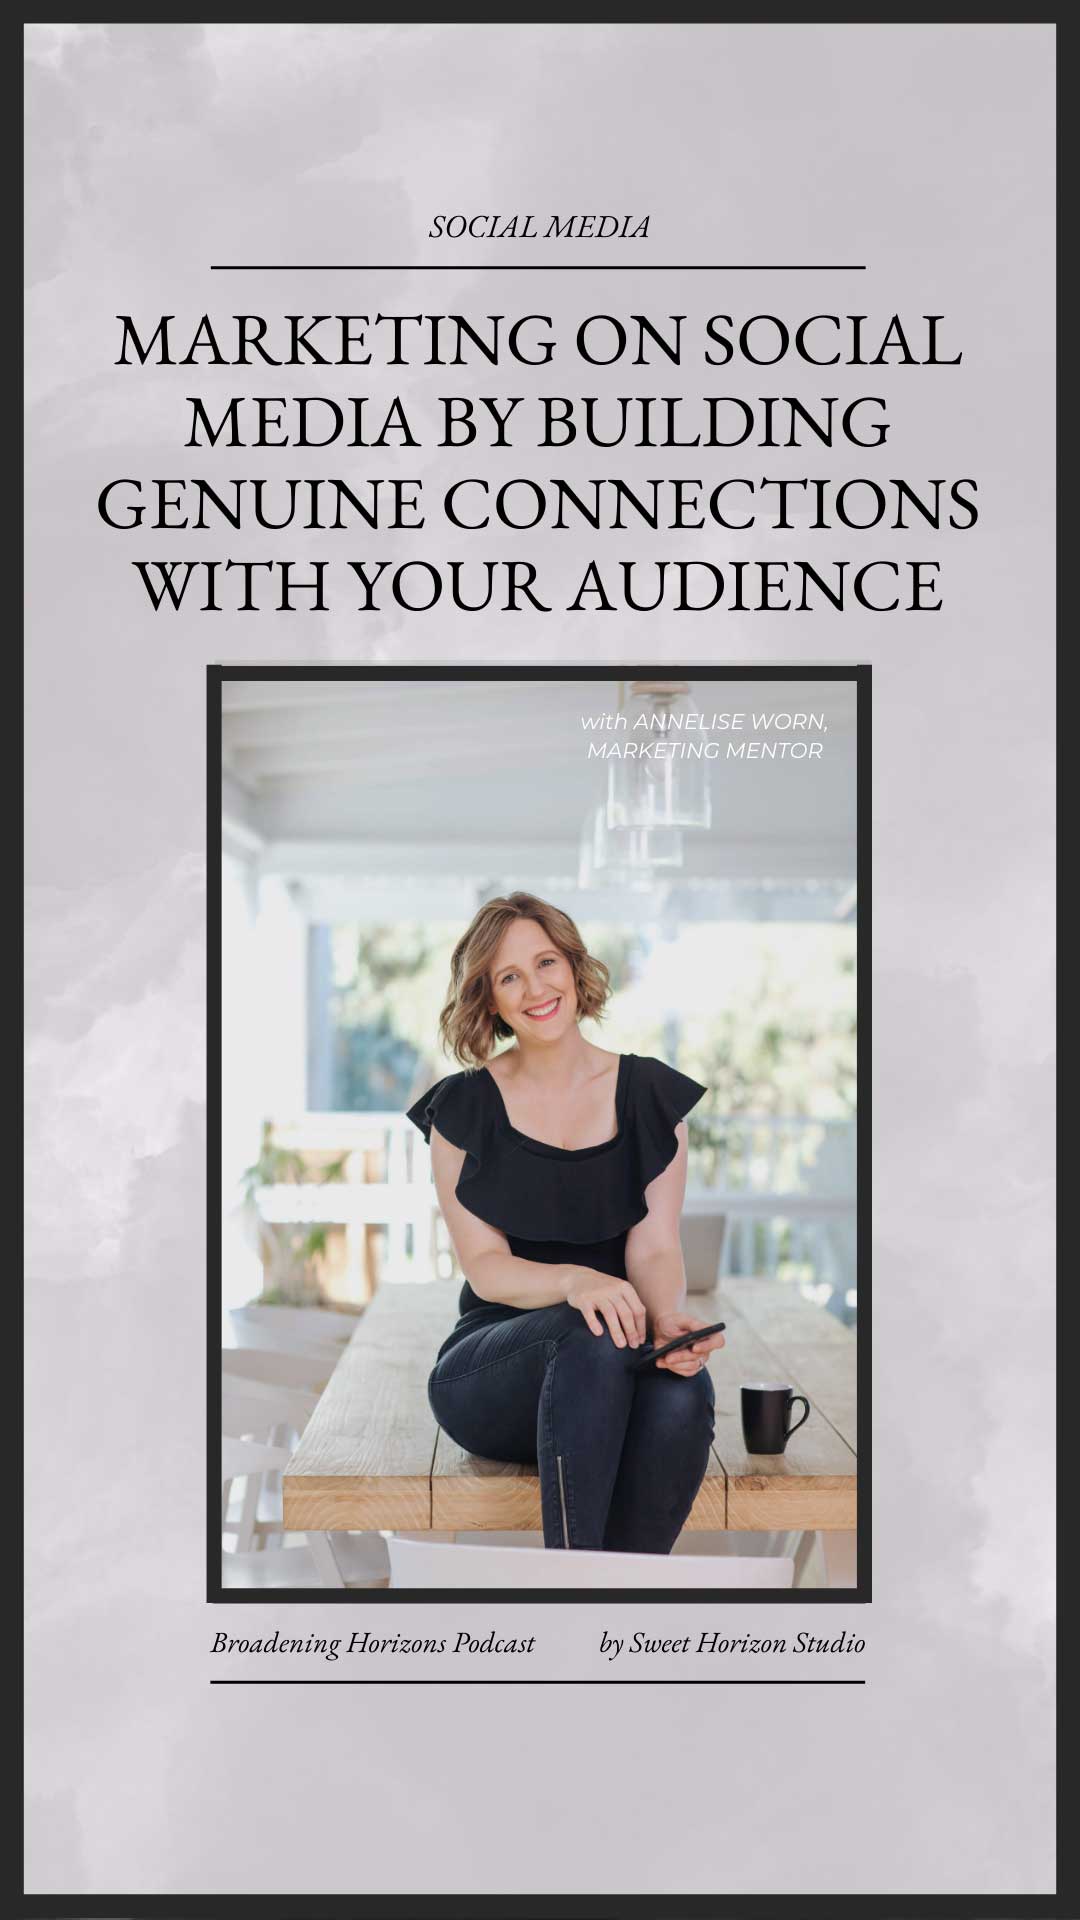 Marketing on Social Media by Building Genuine Connections with Your Audience with Annelise Worn from www.sweethorizonblog.com